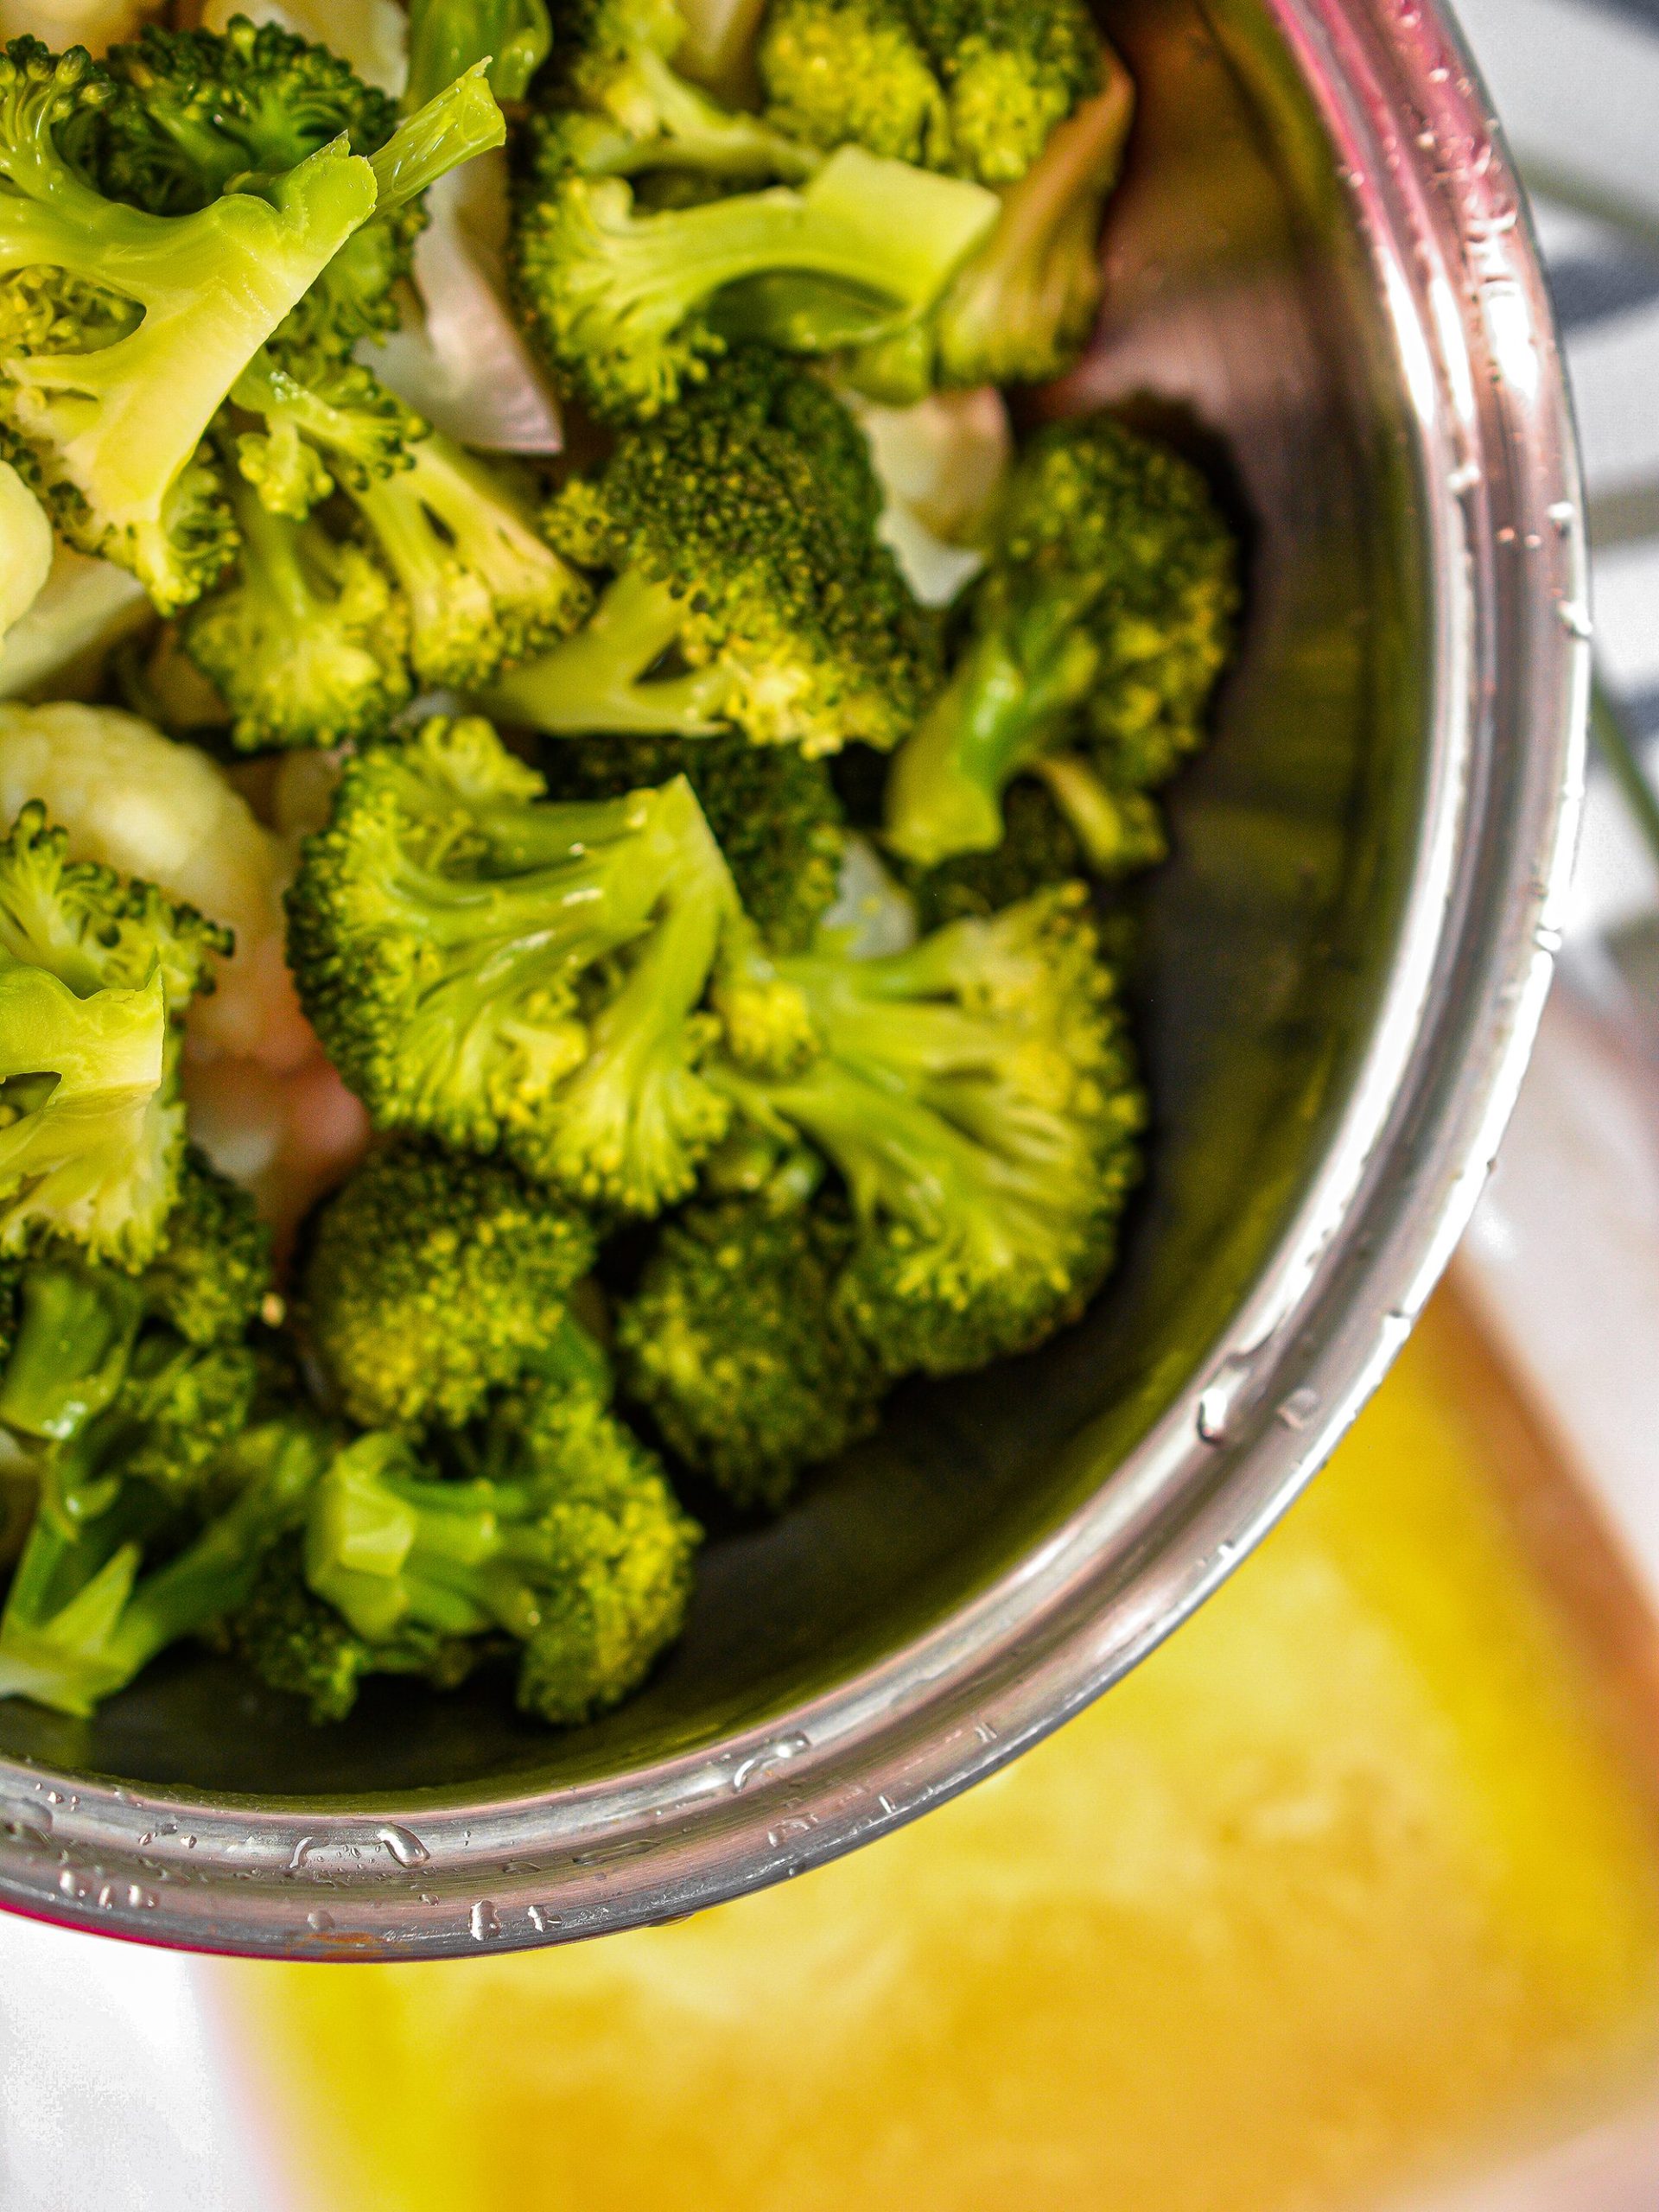  Steam the cauliflower and broccoli for 5 minutes, and layer into the bottom of a well-greased 9x13 baking dish.